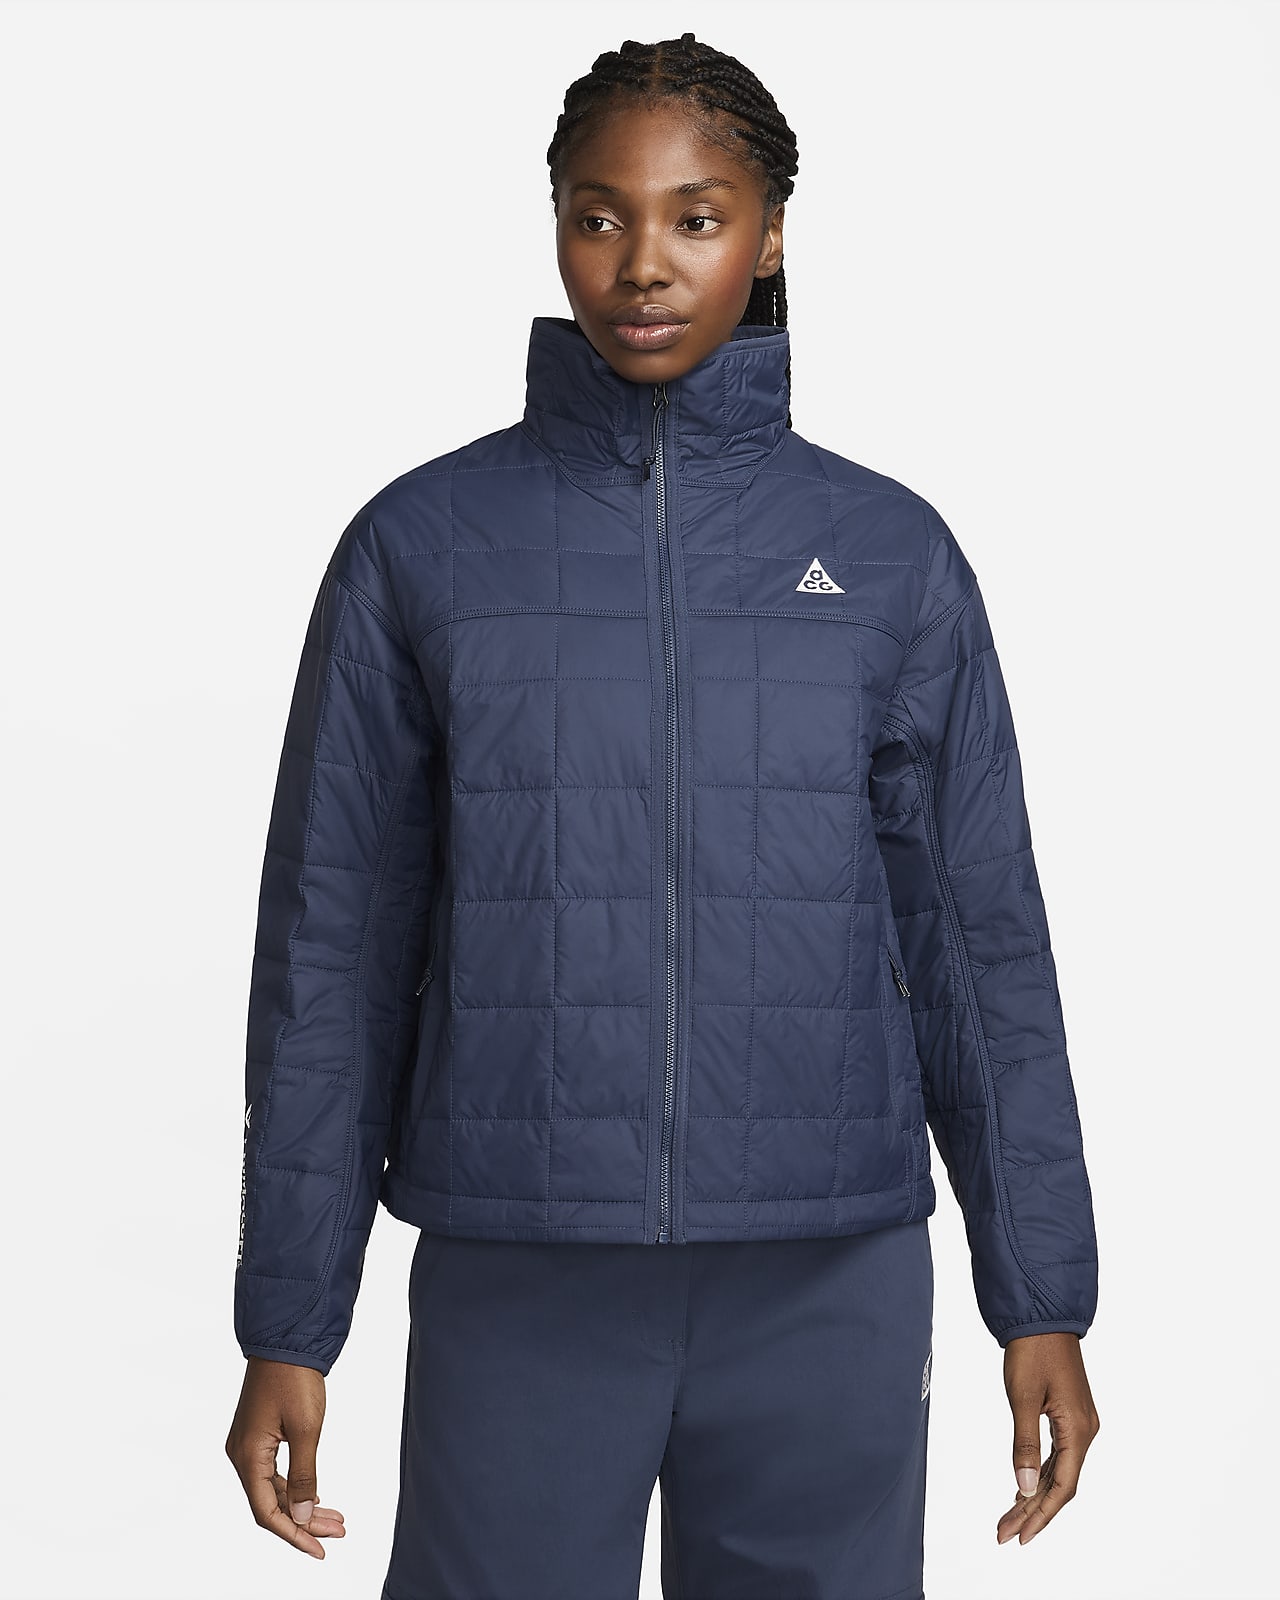 Nike ACG "Rope de Dope" Women's Therma-FIT ADV Quilted Jacket